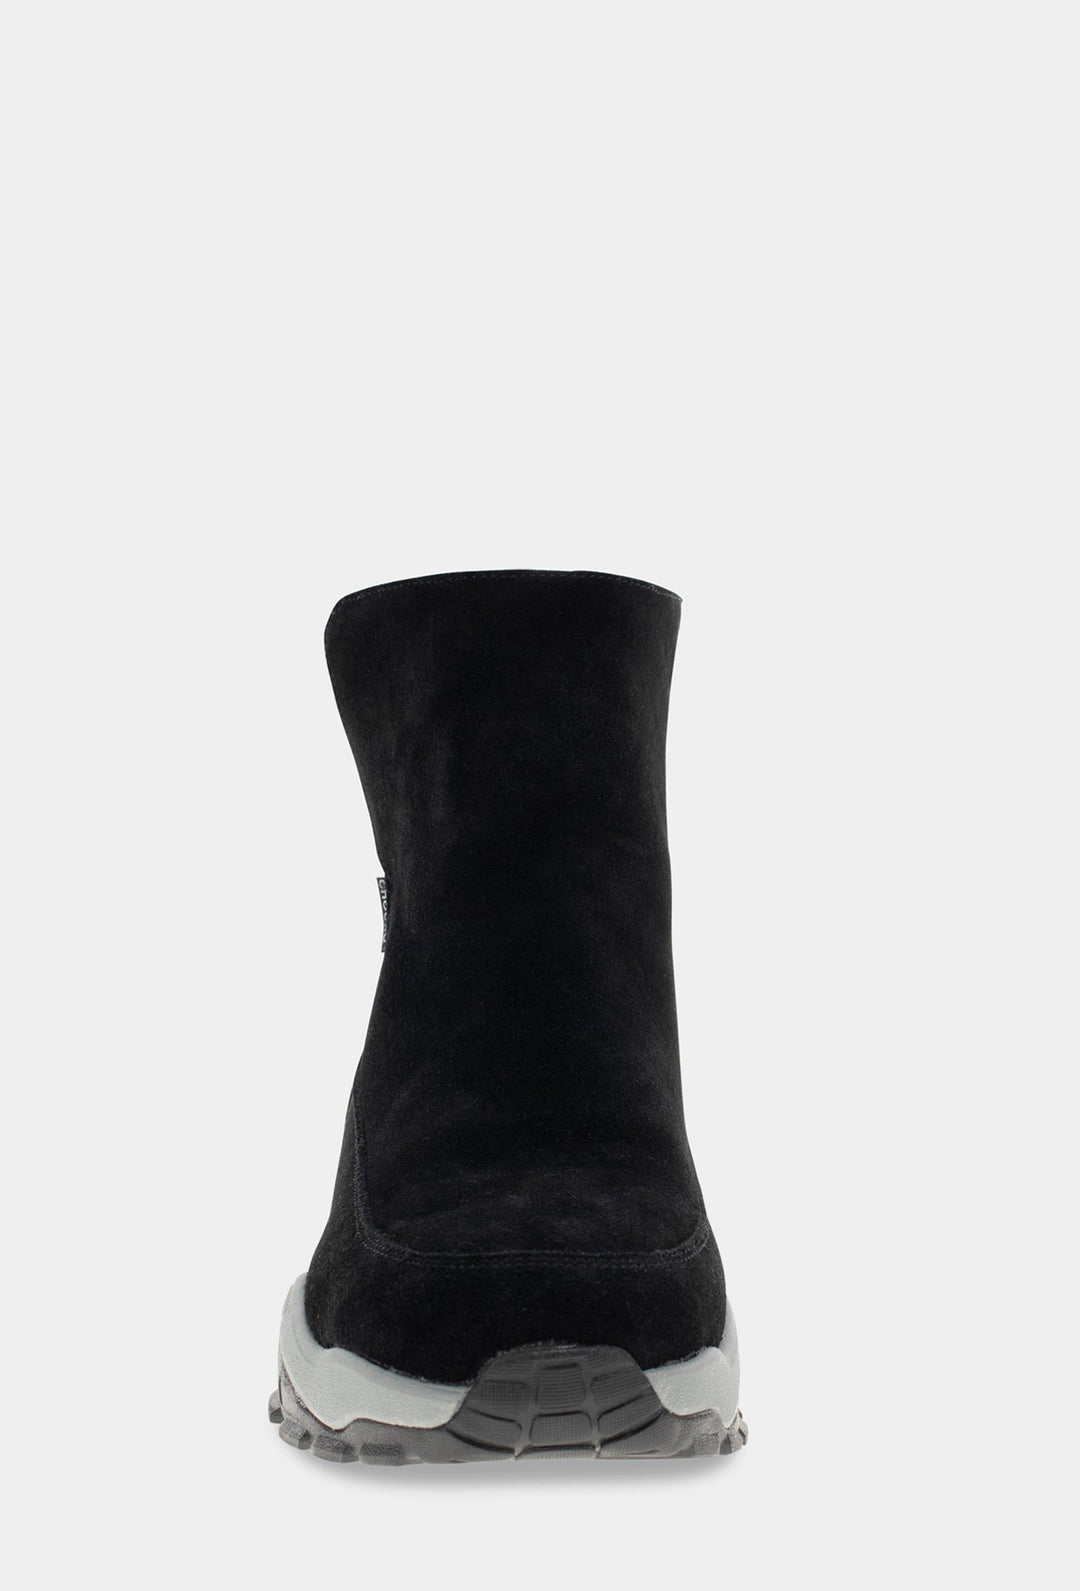 Lenox Cold Weather Boot - Black - Western Chief